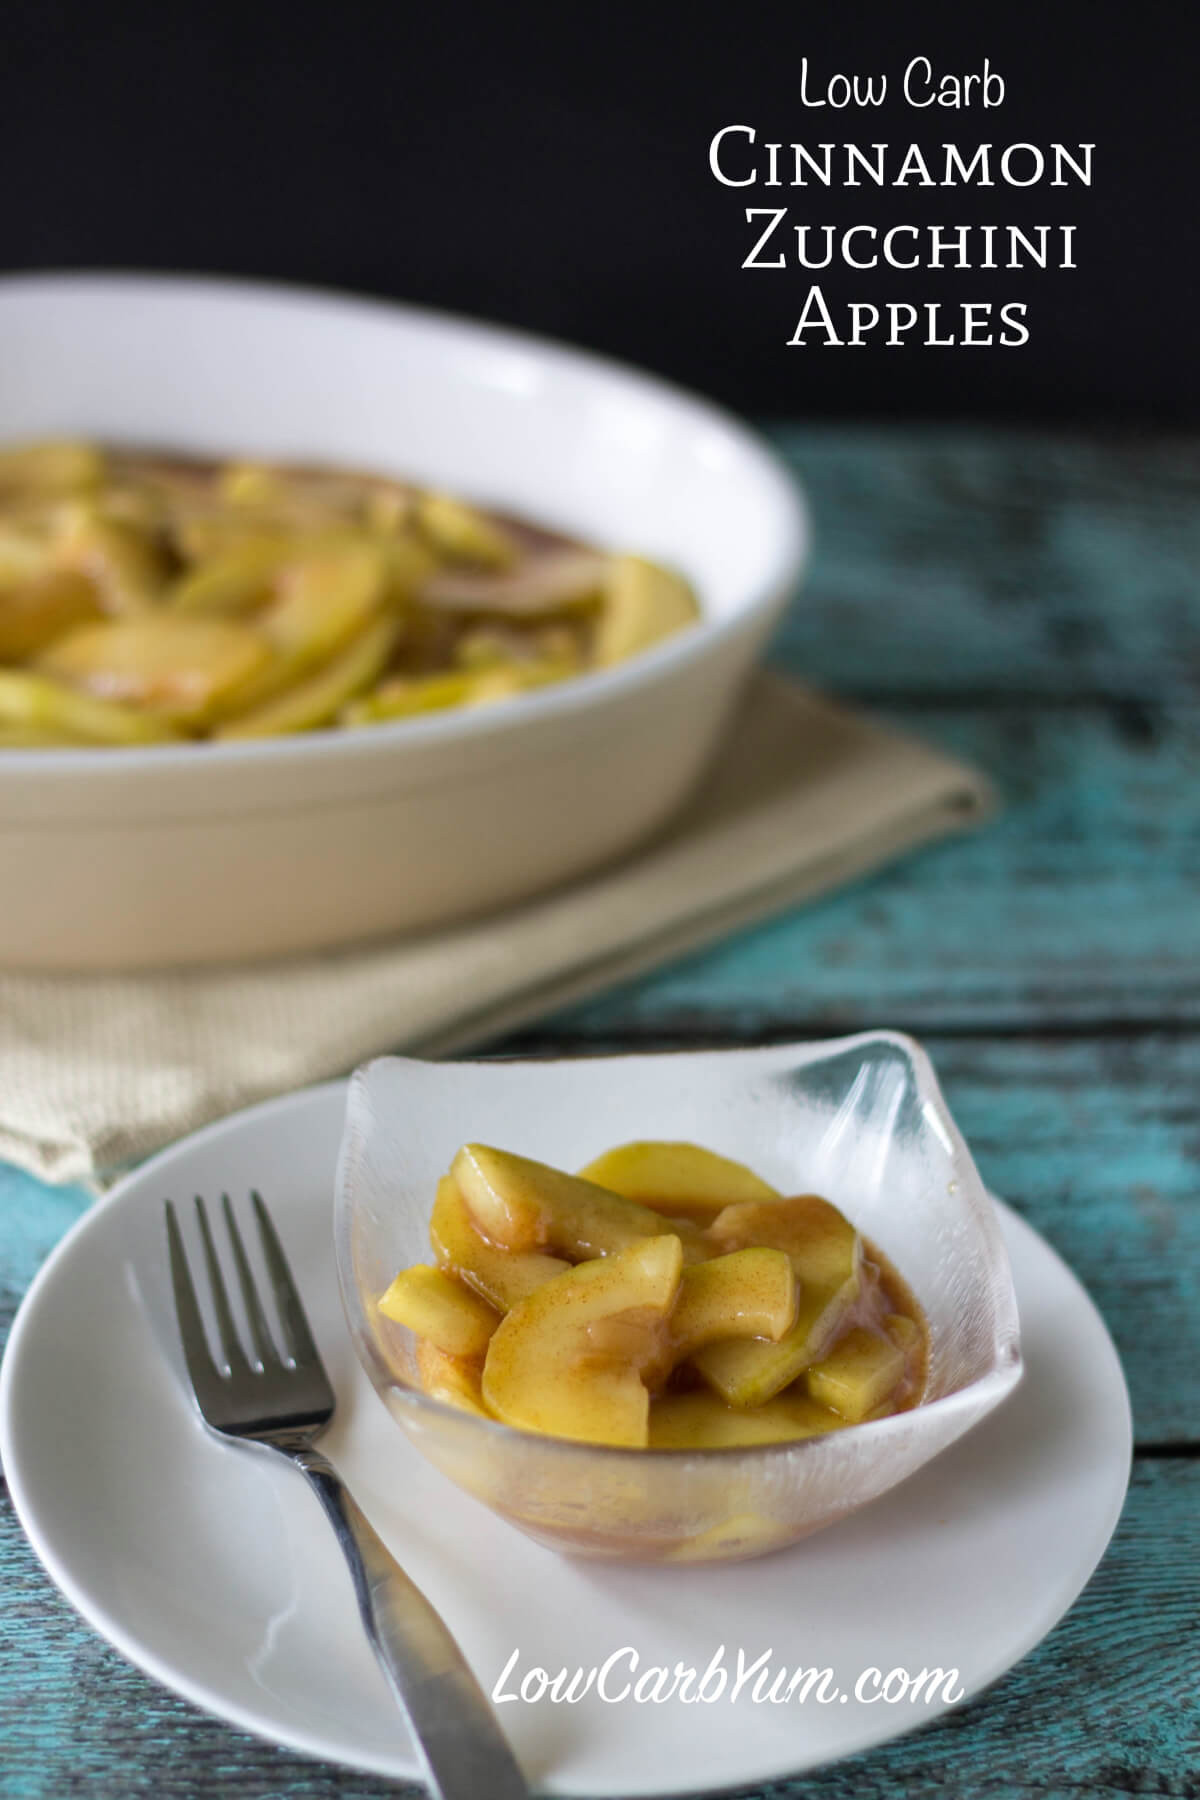 Low Carb Apple Recipes
 Low Carb Zucchini Cinnamon Apples